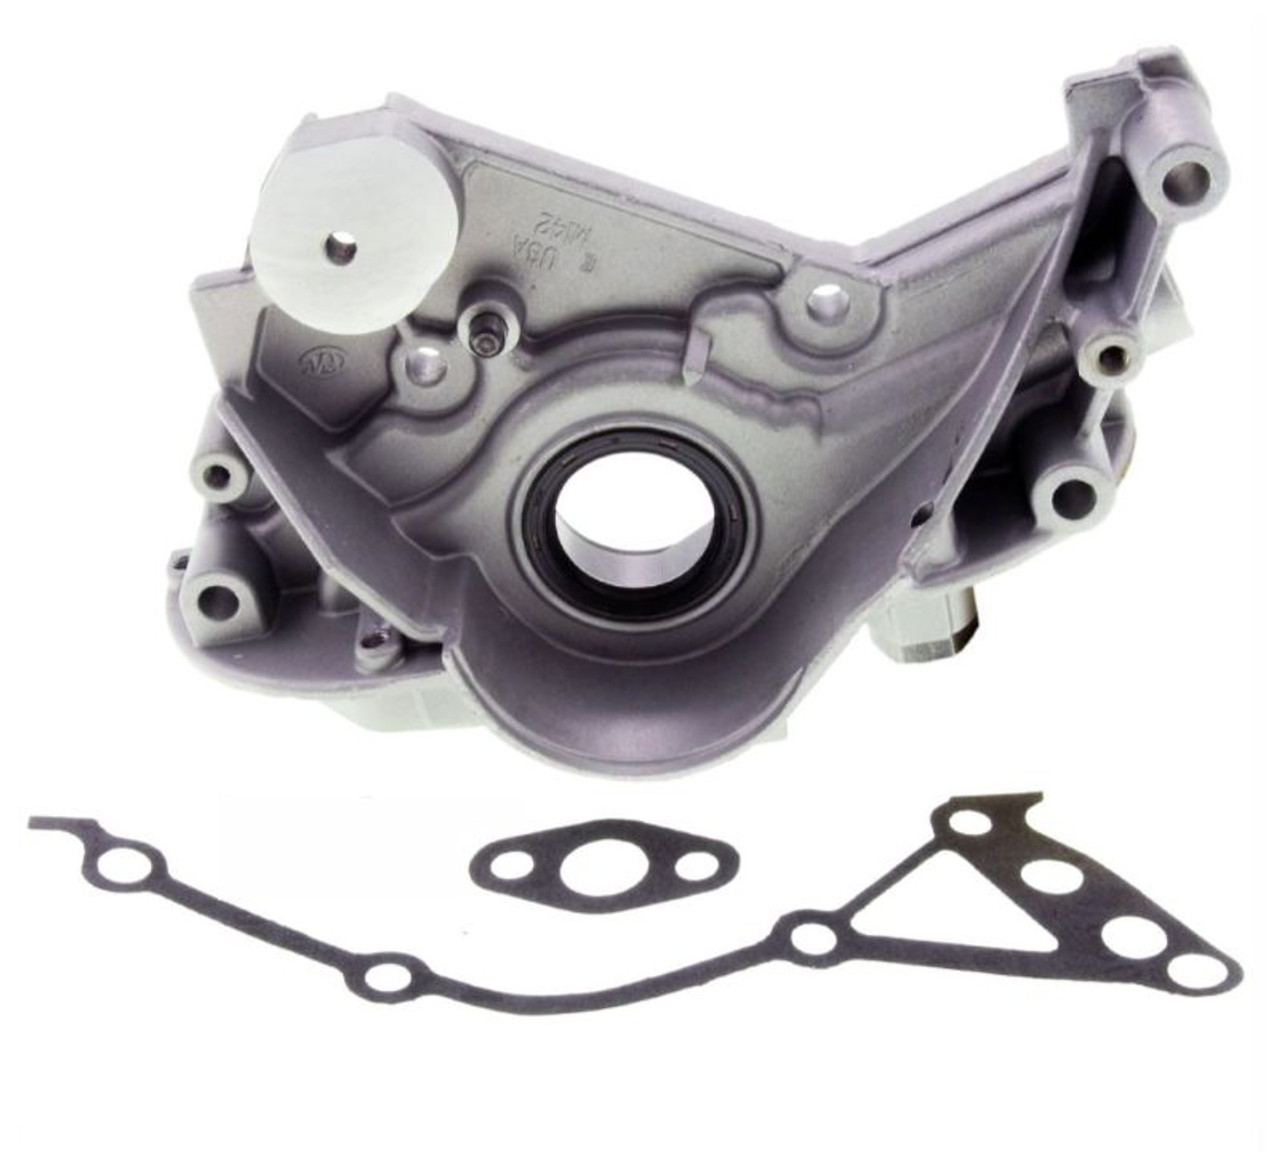 1997 Plymouth Grand Voyager 3.0L Engine Oil Pump EP142 -83